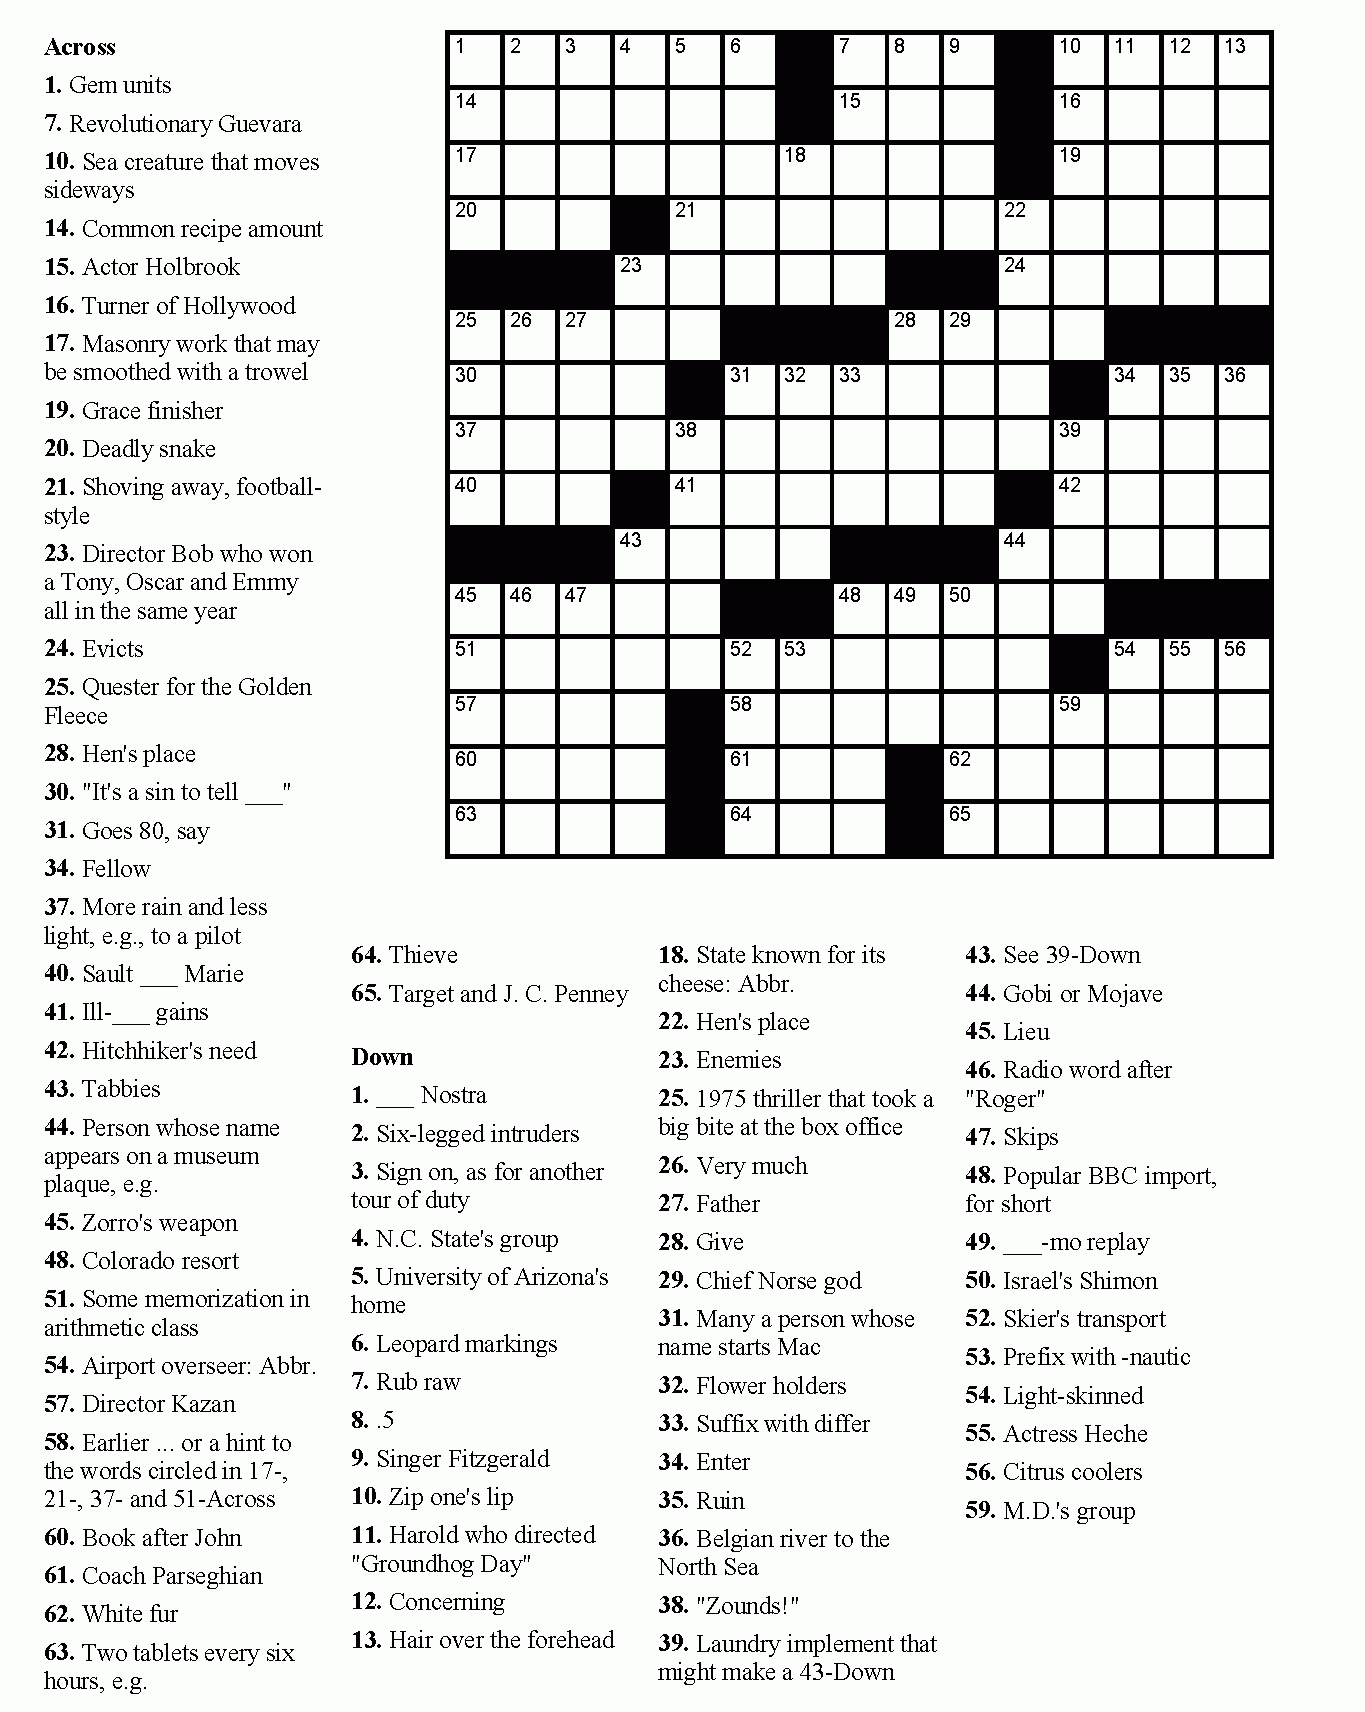 Free Printable Crossword Puzzles Easy For Adults | My Board | Free - Free Printable Crossword Puzzle #1